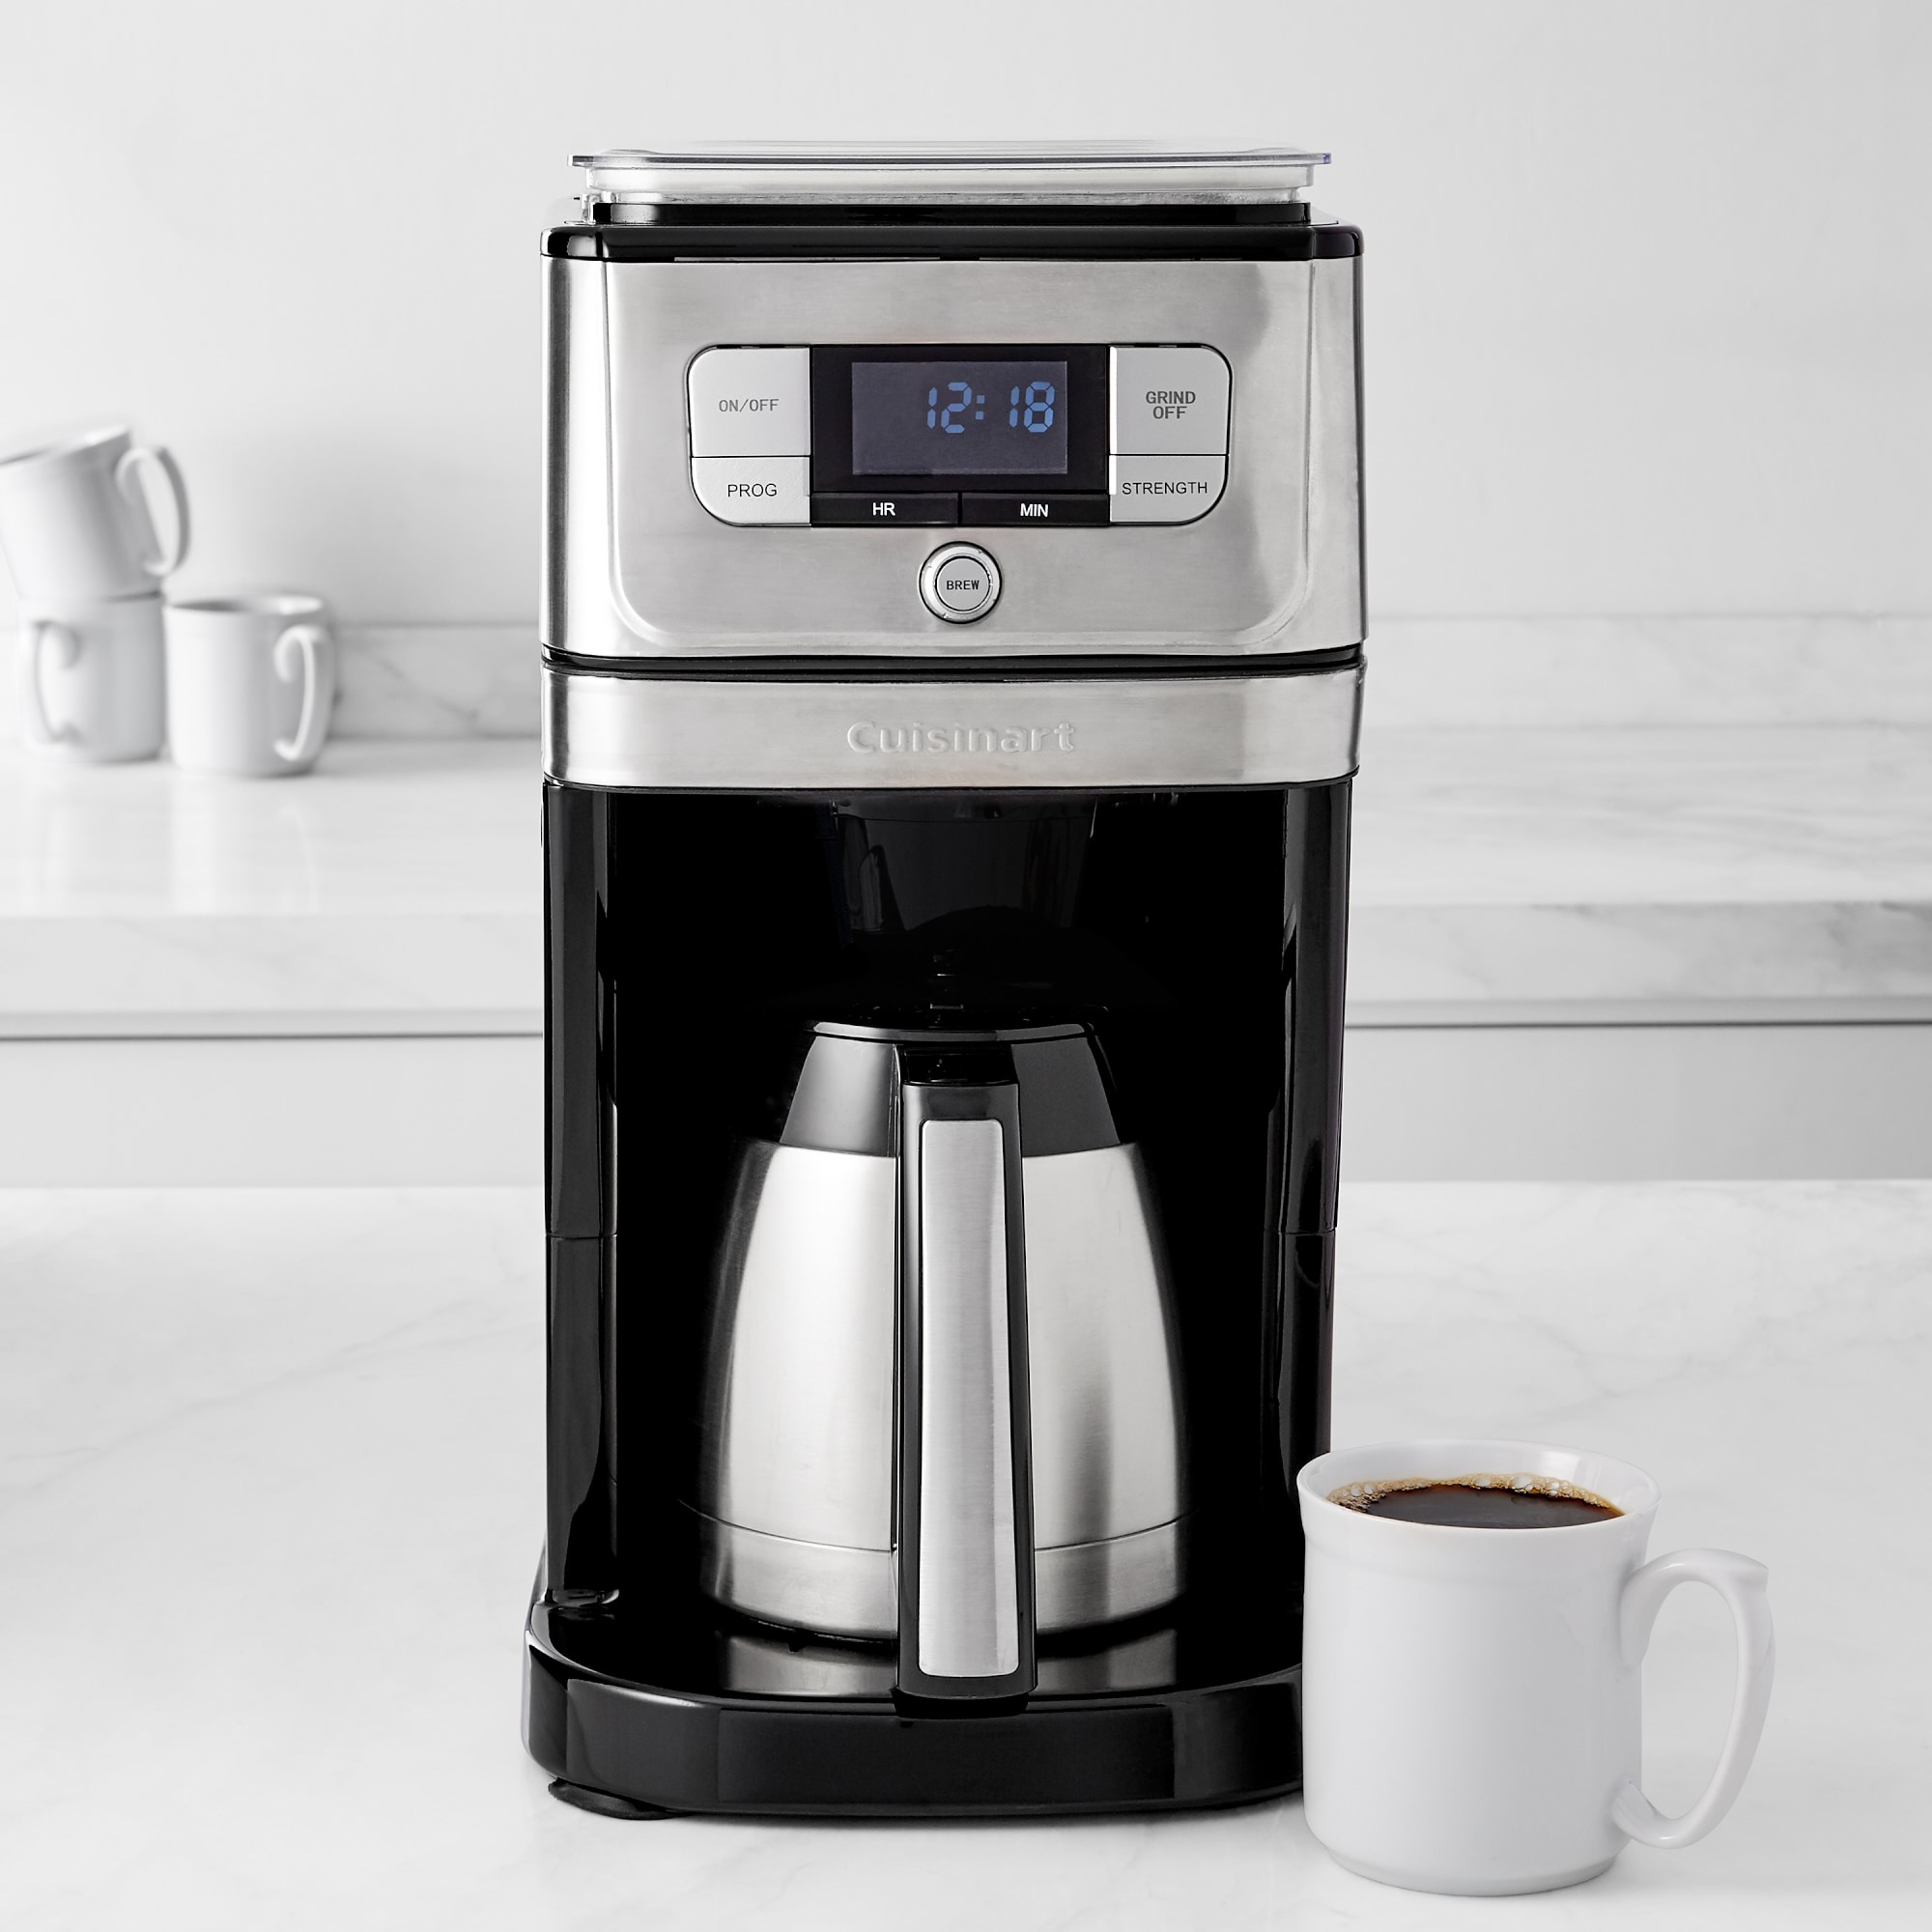 Cuisinart Burr Grind & Brew Coffee Maker with Thermal Carafe